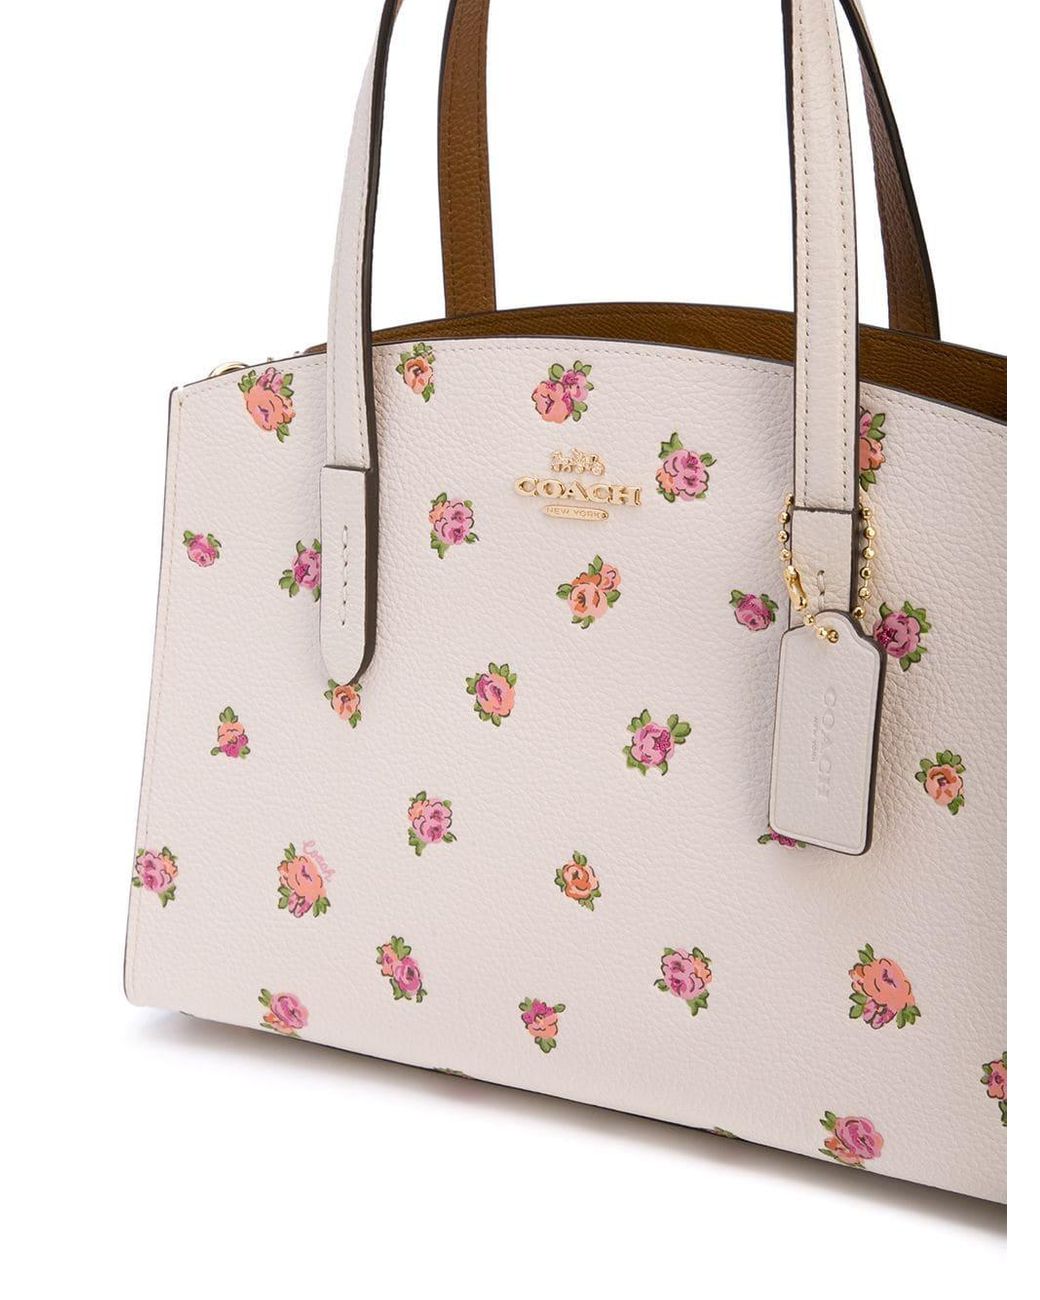 COACH Leather Floral Print Tote Bag in White | Lyst